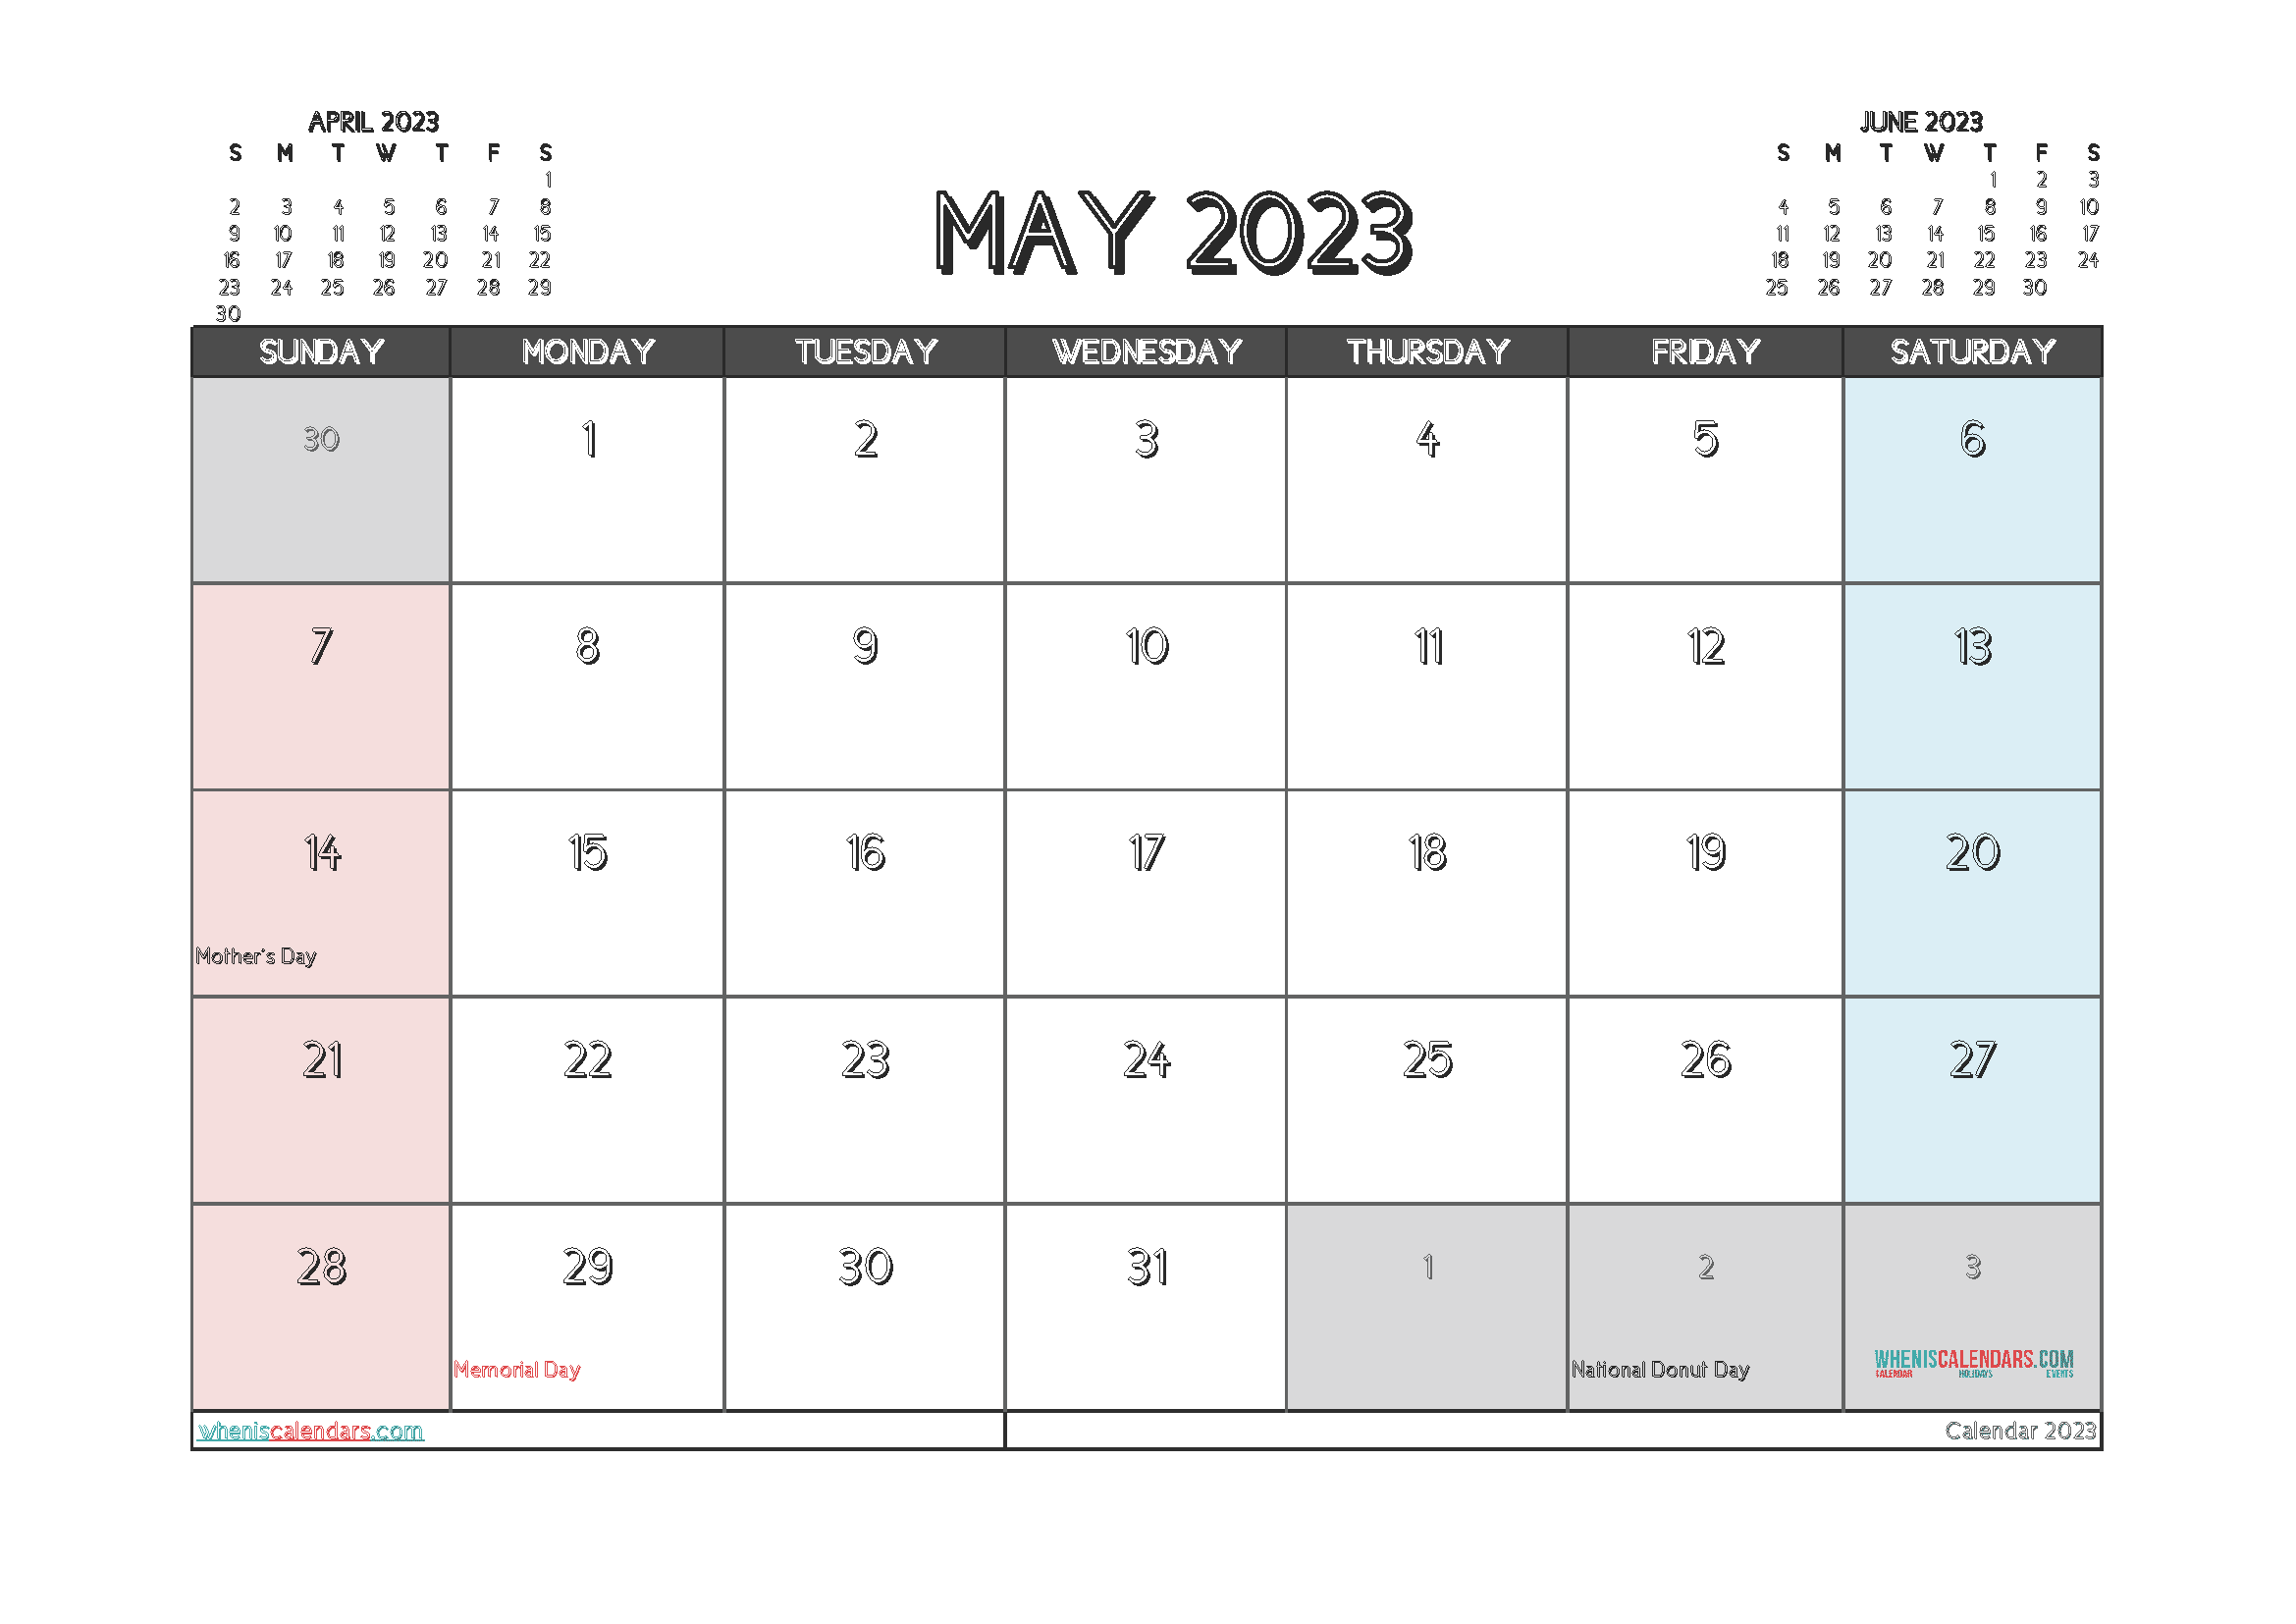 Free Printable Calendar 2023 May with Holidays PDF in Landscape